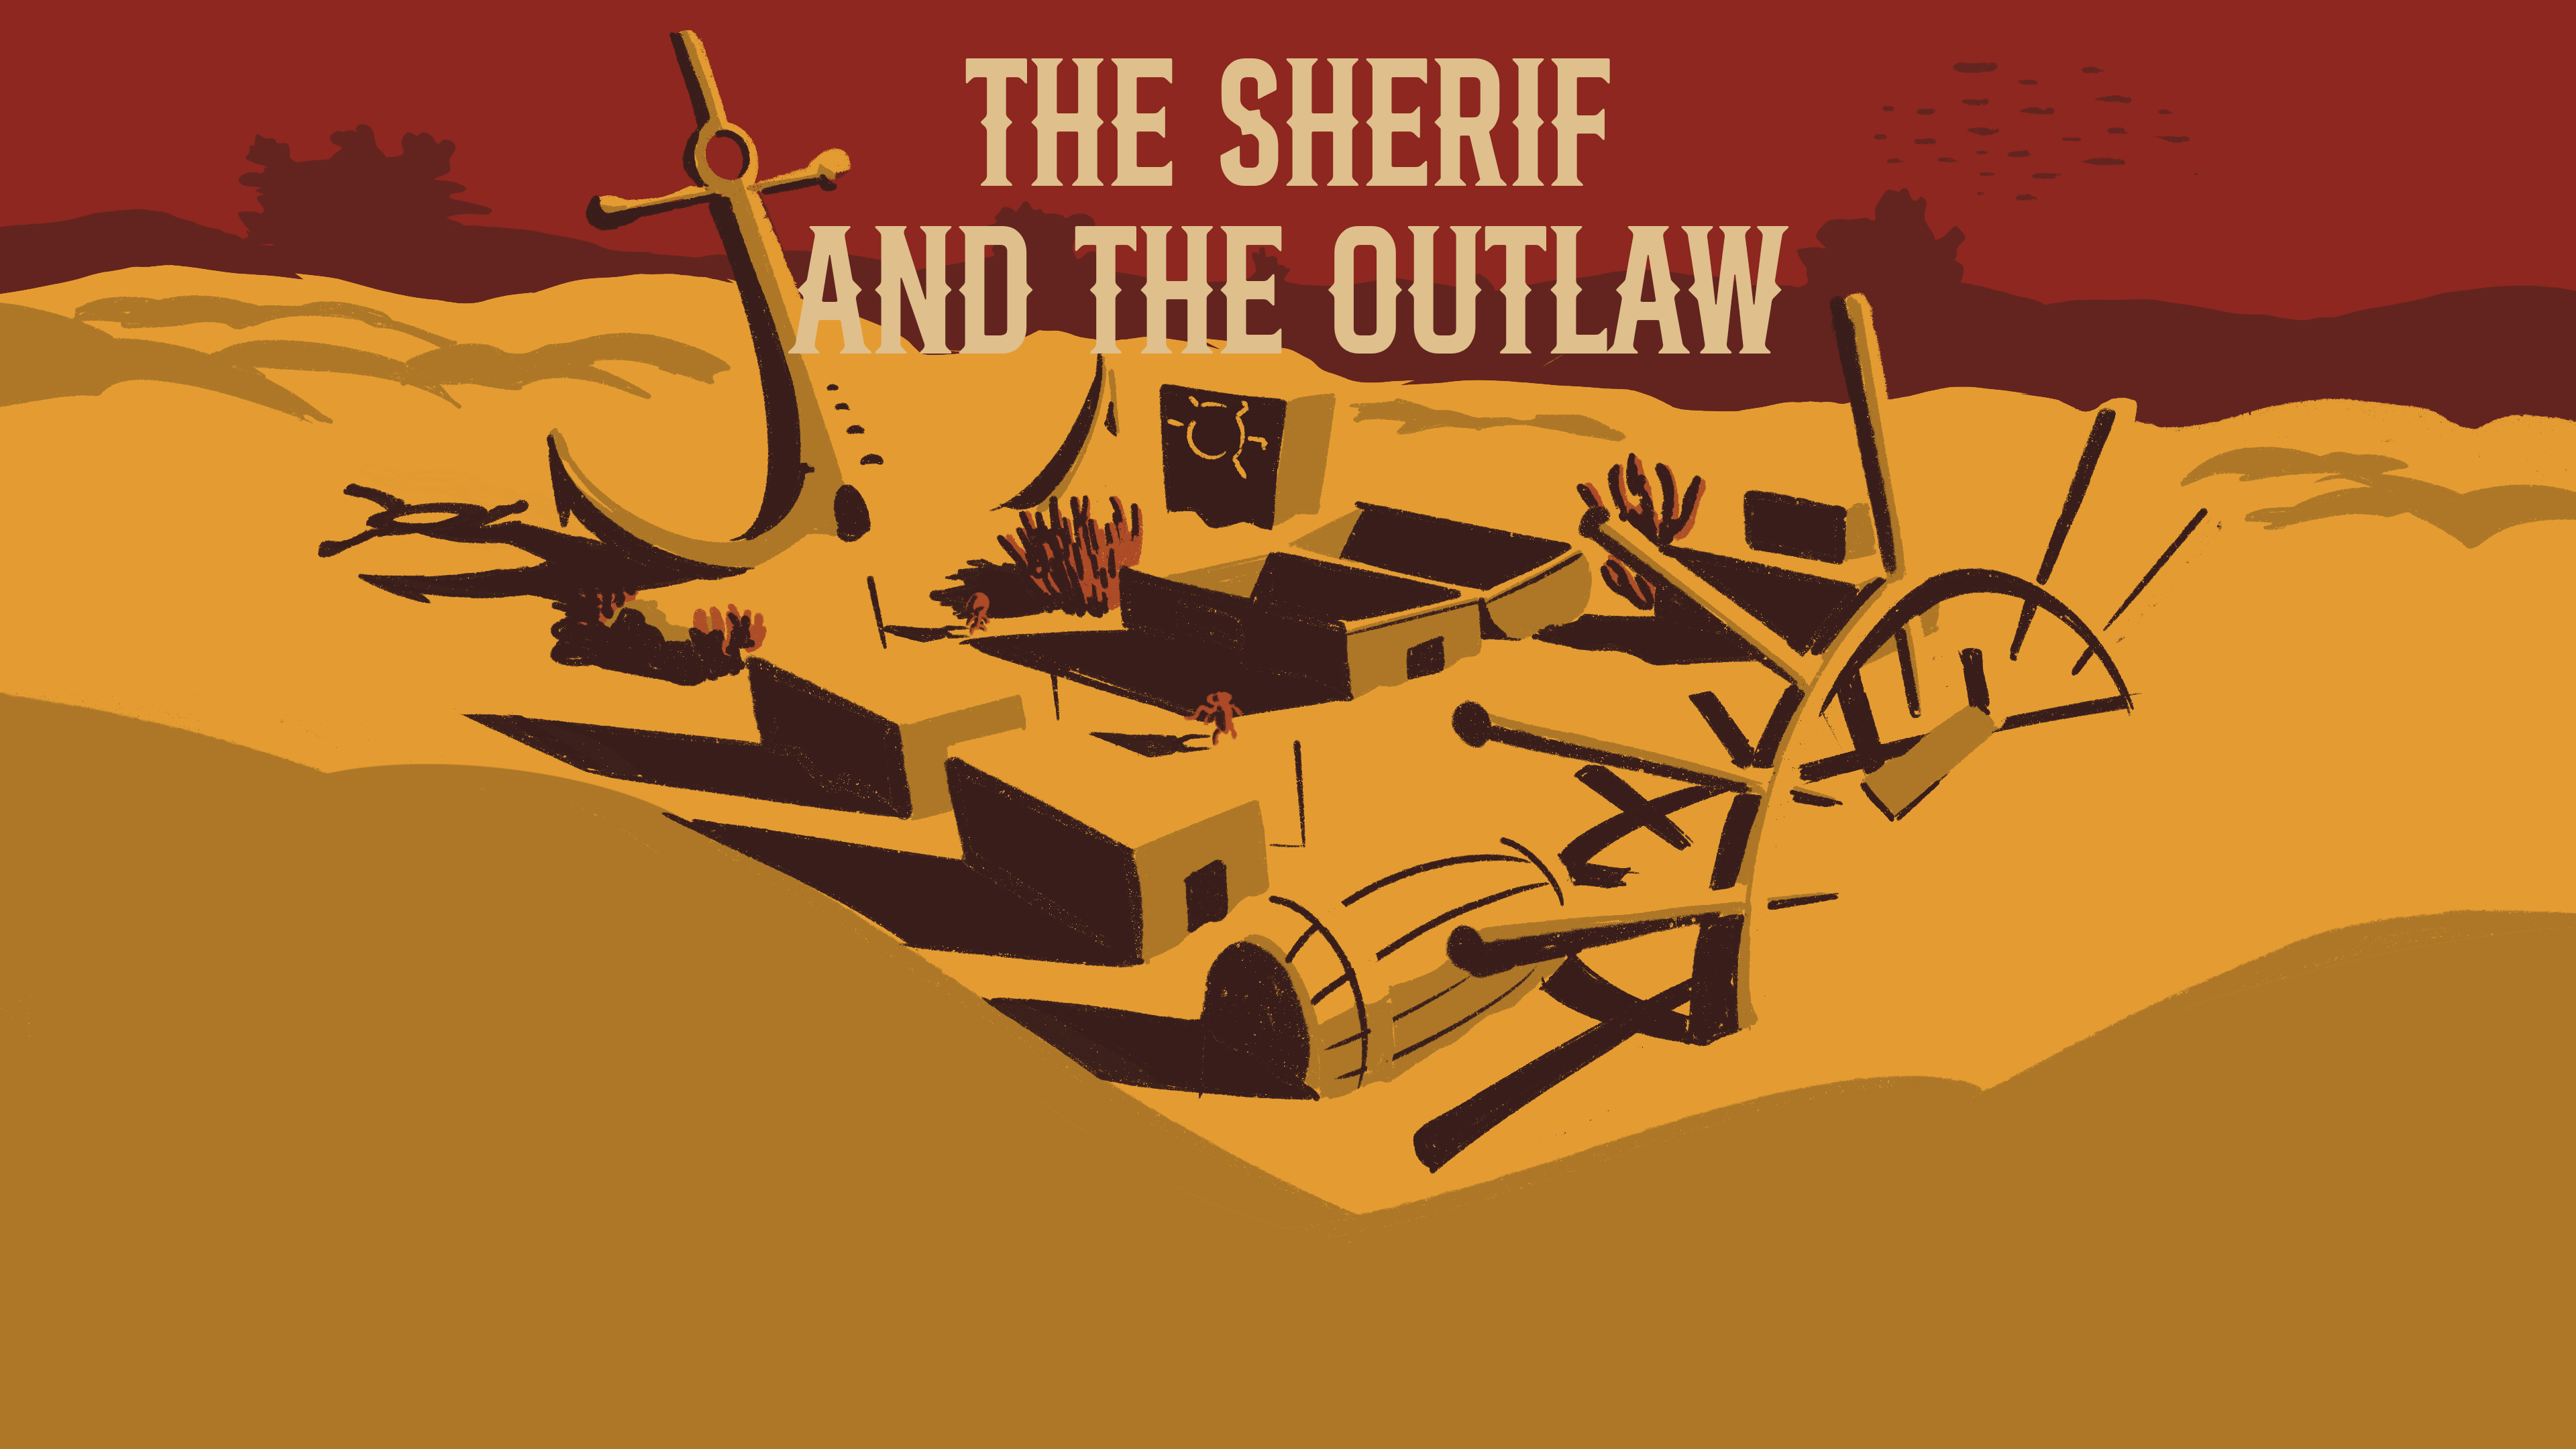 The Sherif and The Outlaw